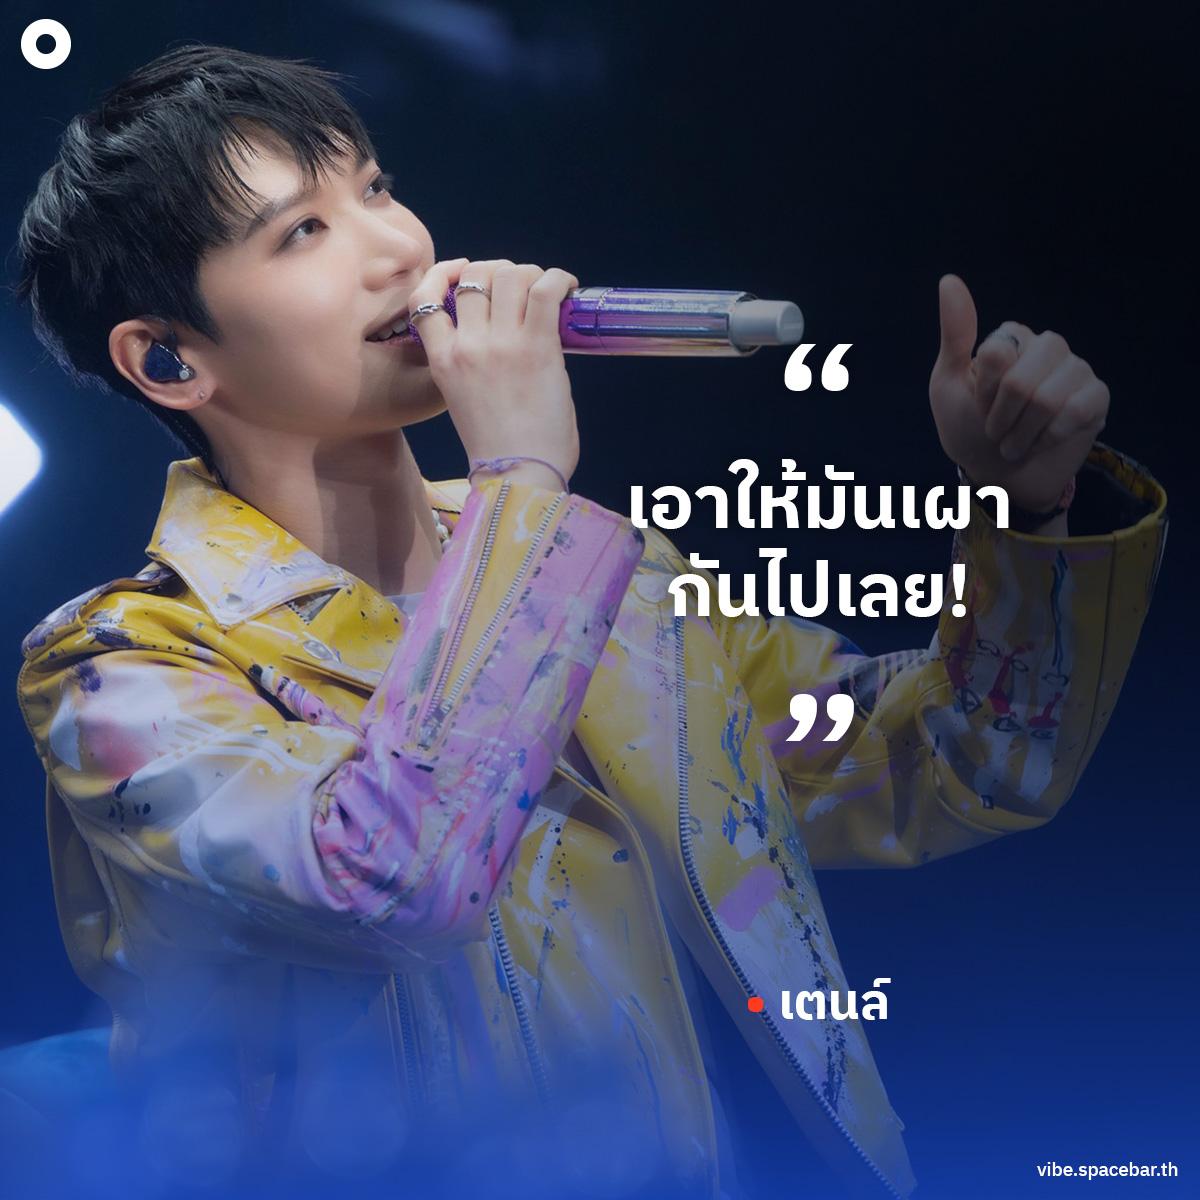 quote-tenlee-from-first-fan-con-bkk-SPACEBAR-Photo_SQ02.jpg